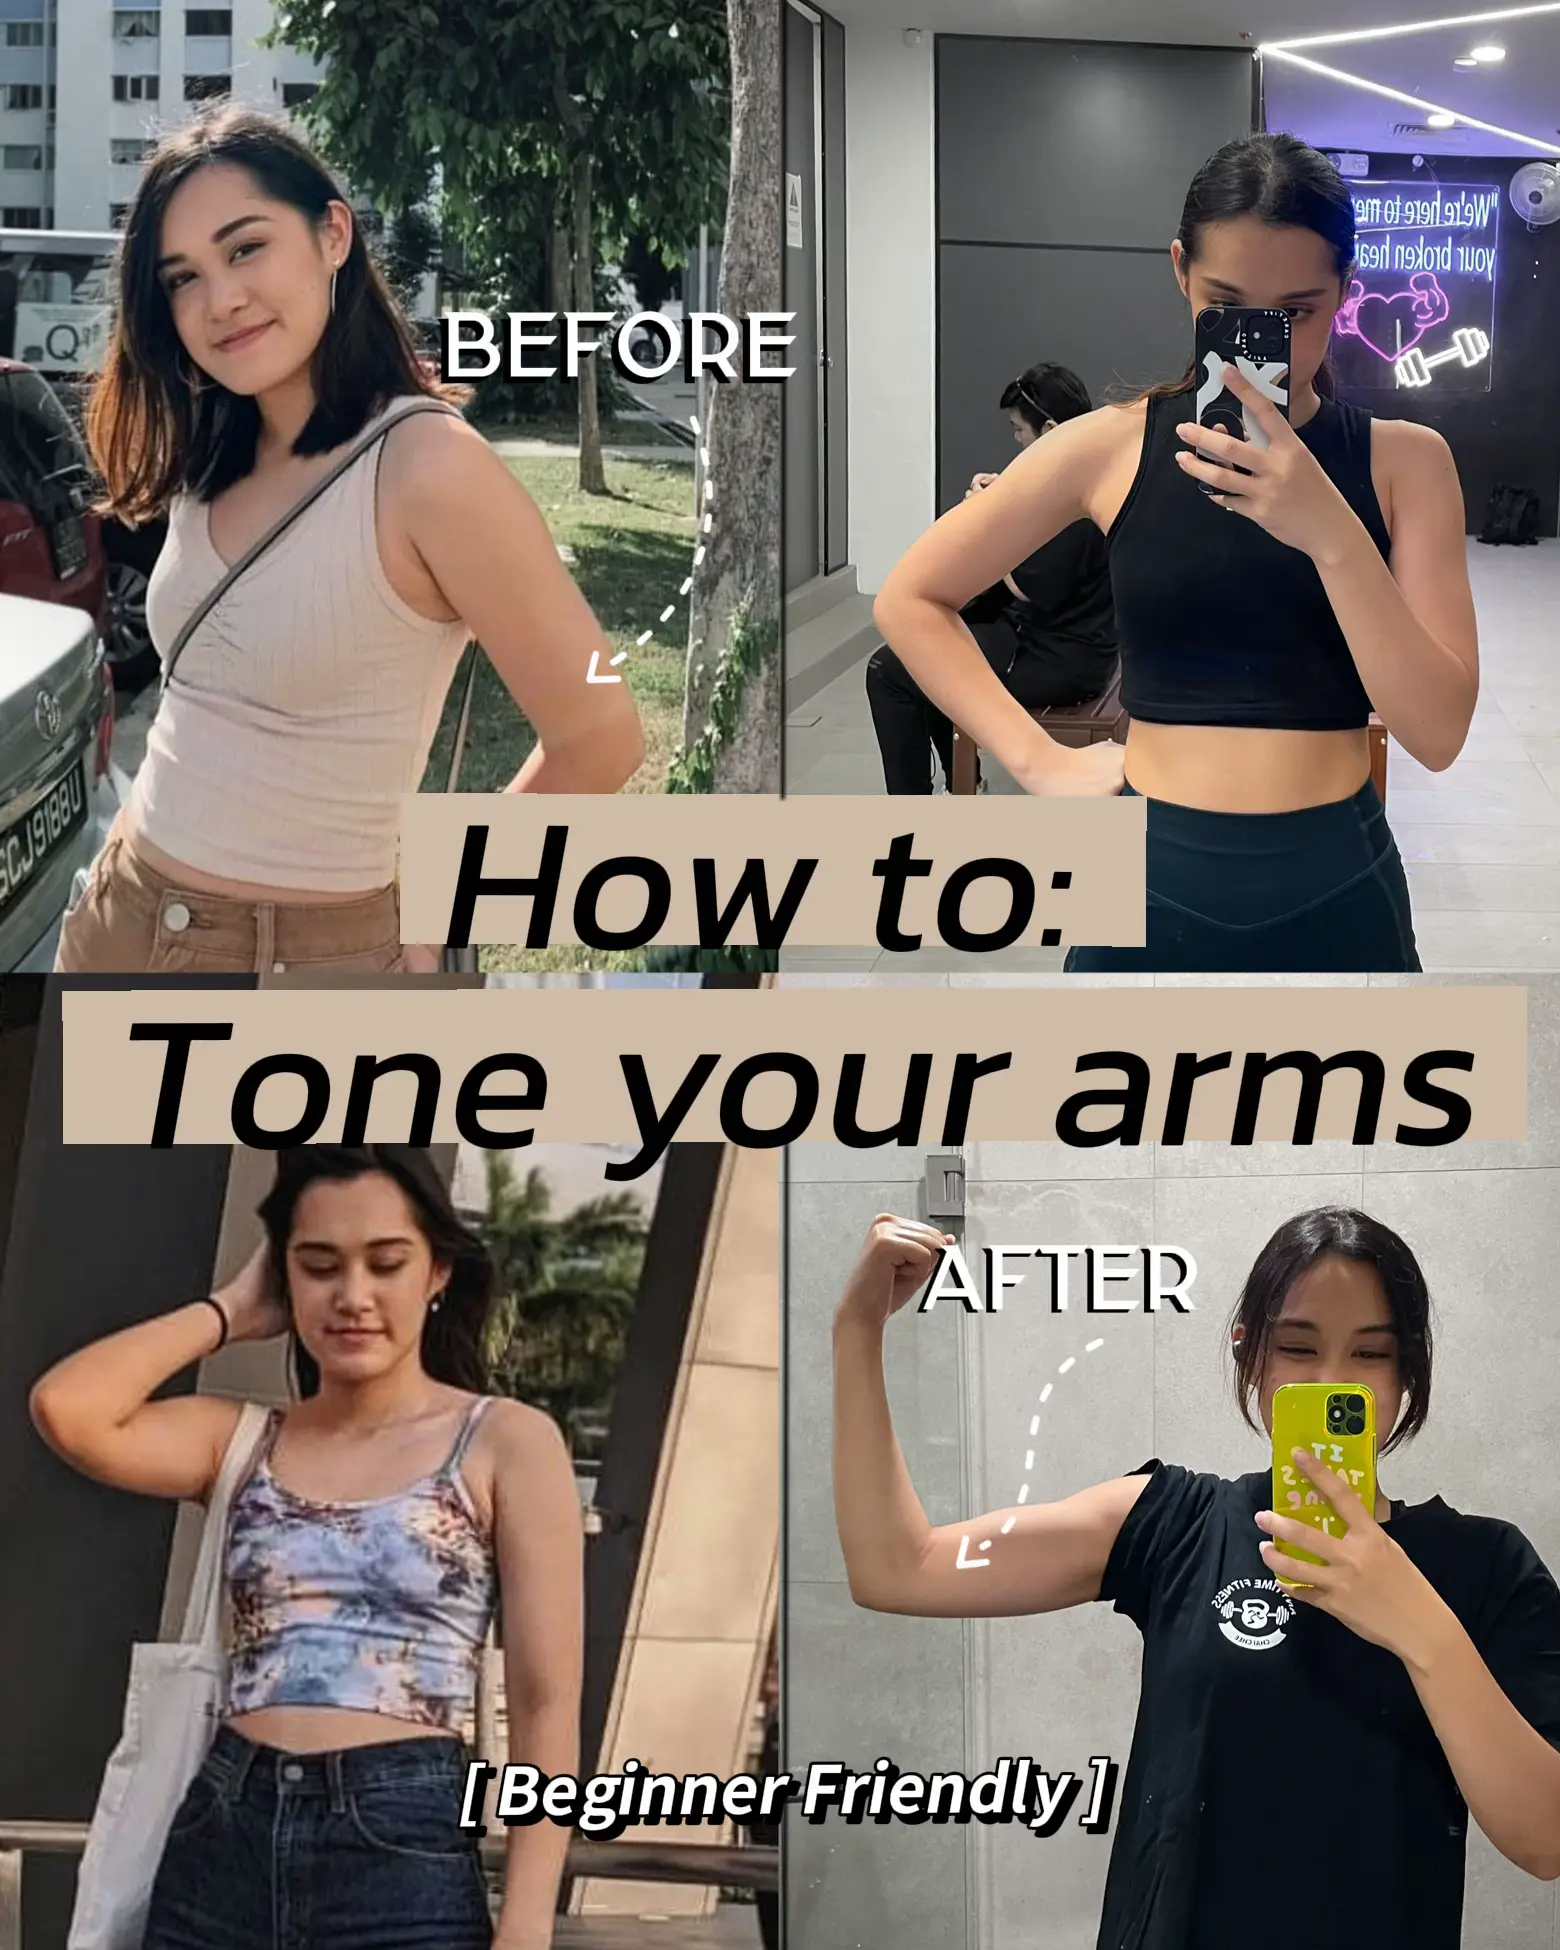 6 exercises to tone your arms! 💪🏽 Day 4: Arms